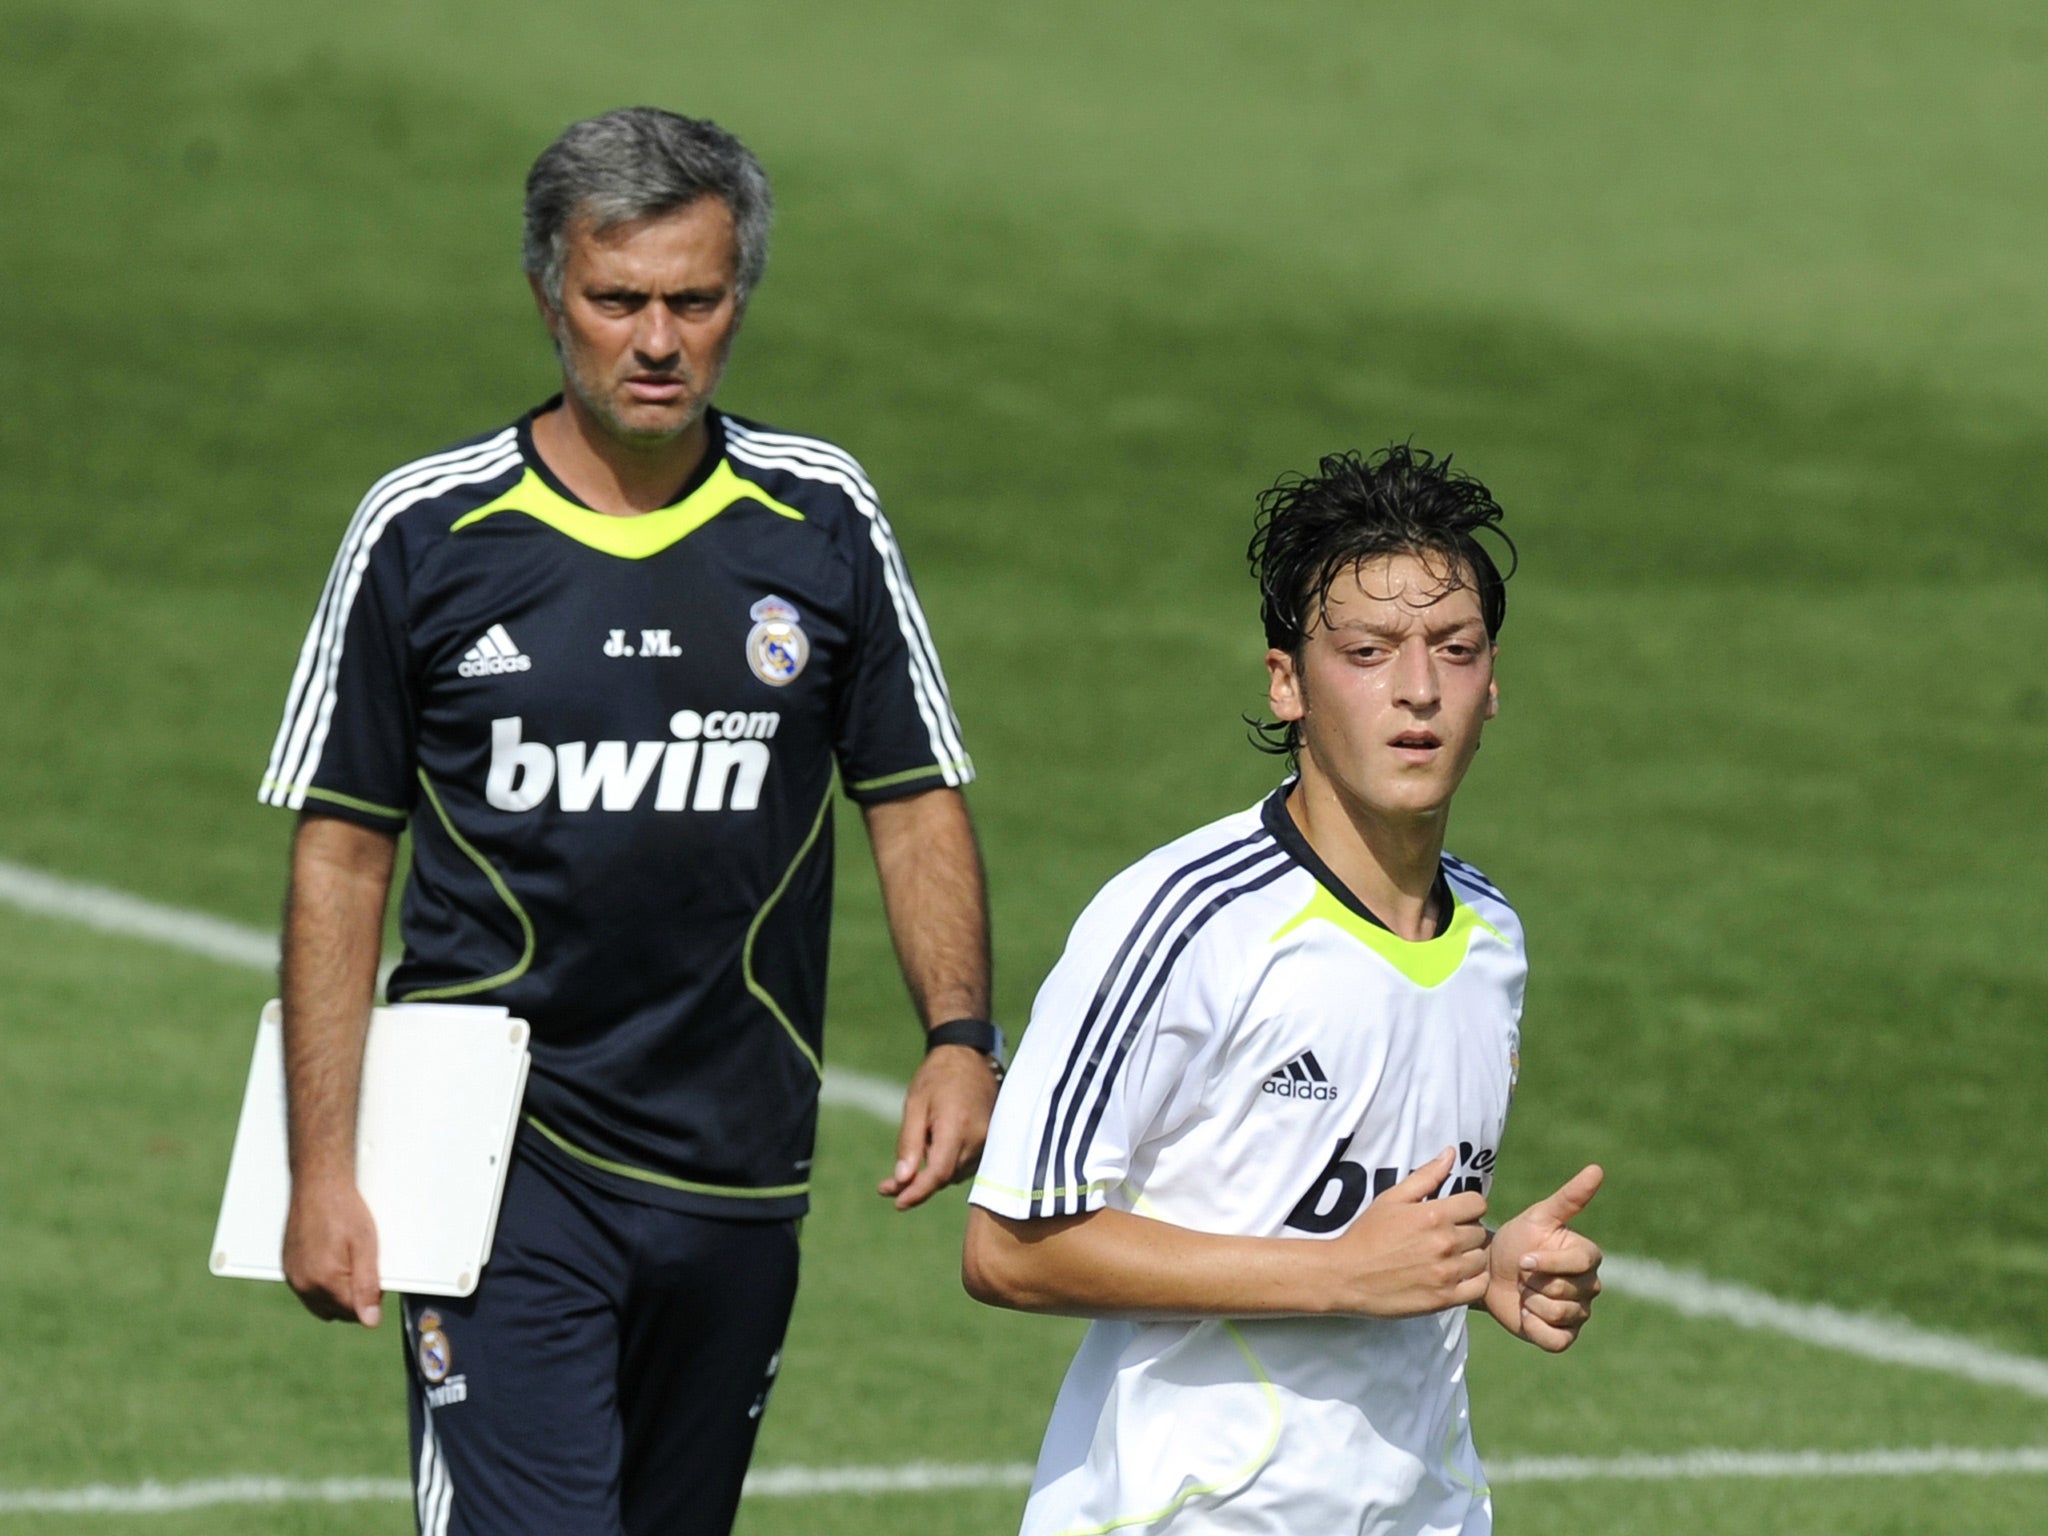 Jose Mourinho and Mesut Ozil spent three years together at Real Madrid before both leaving in 2013